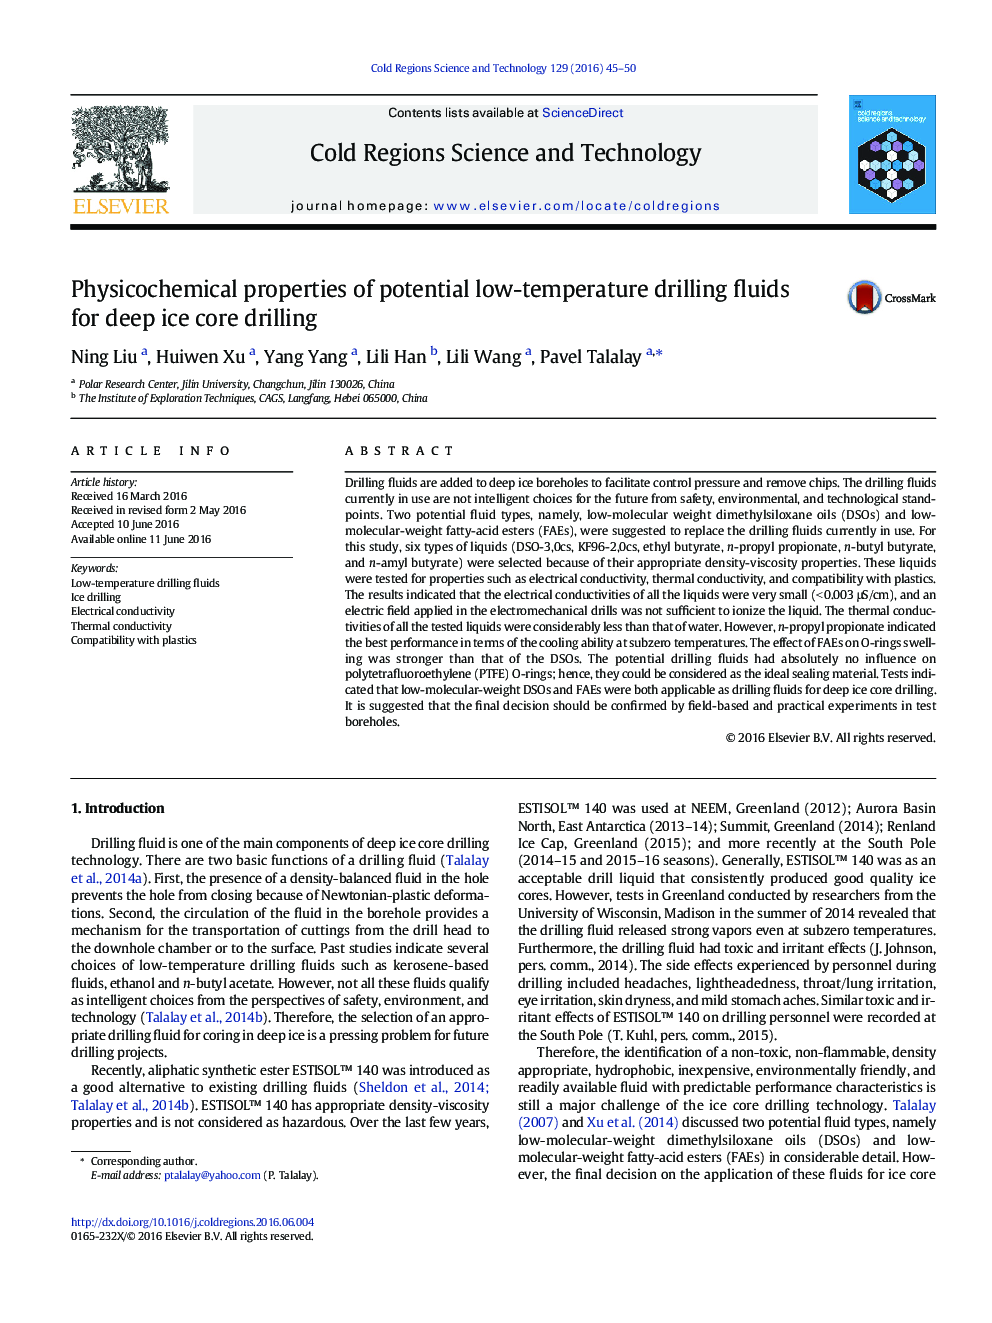 Physicochemical properties of potential low-temperature drilling fluids for deep ice core drilling